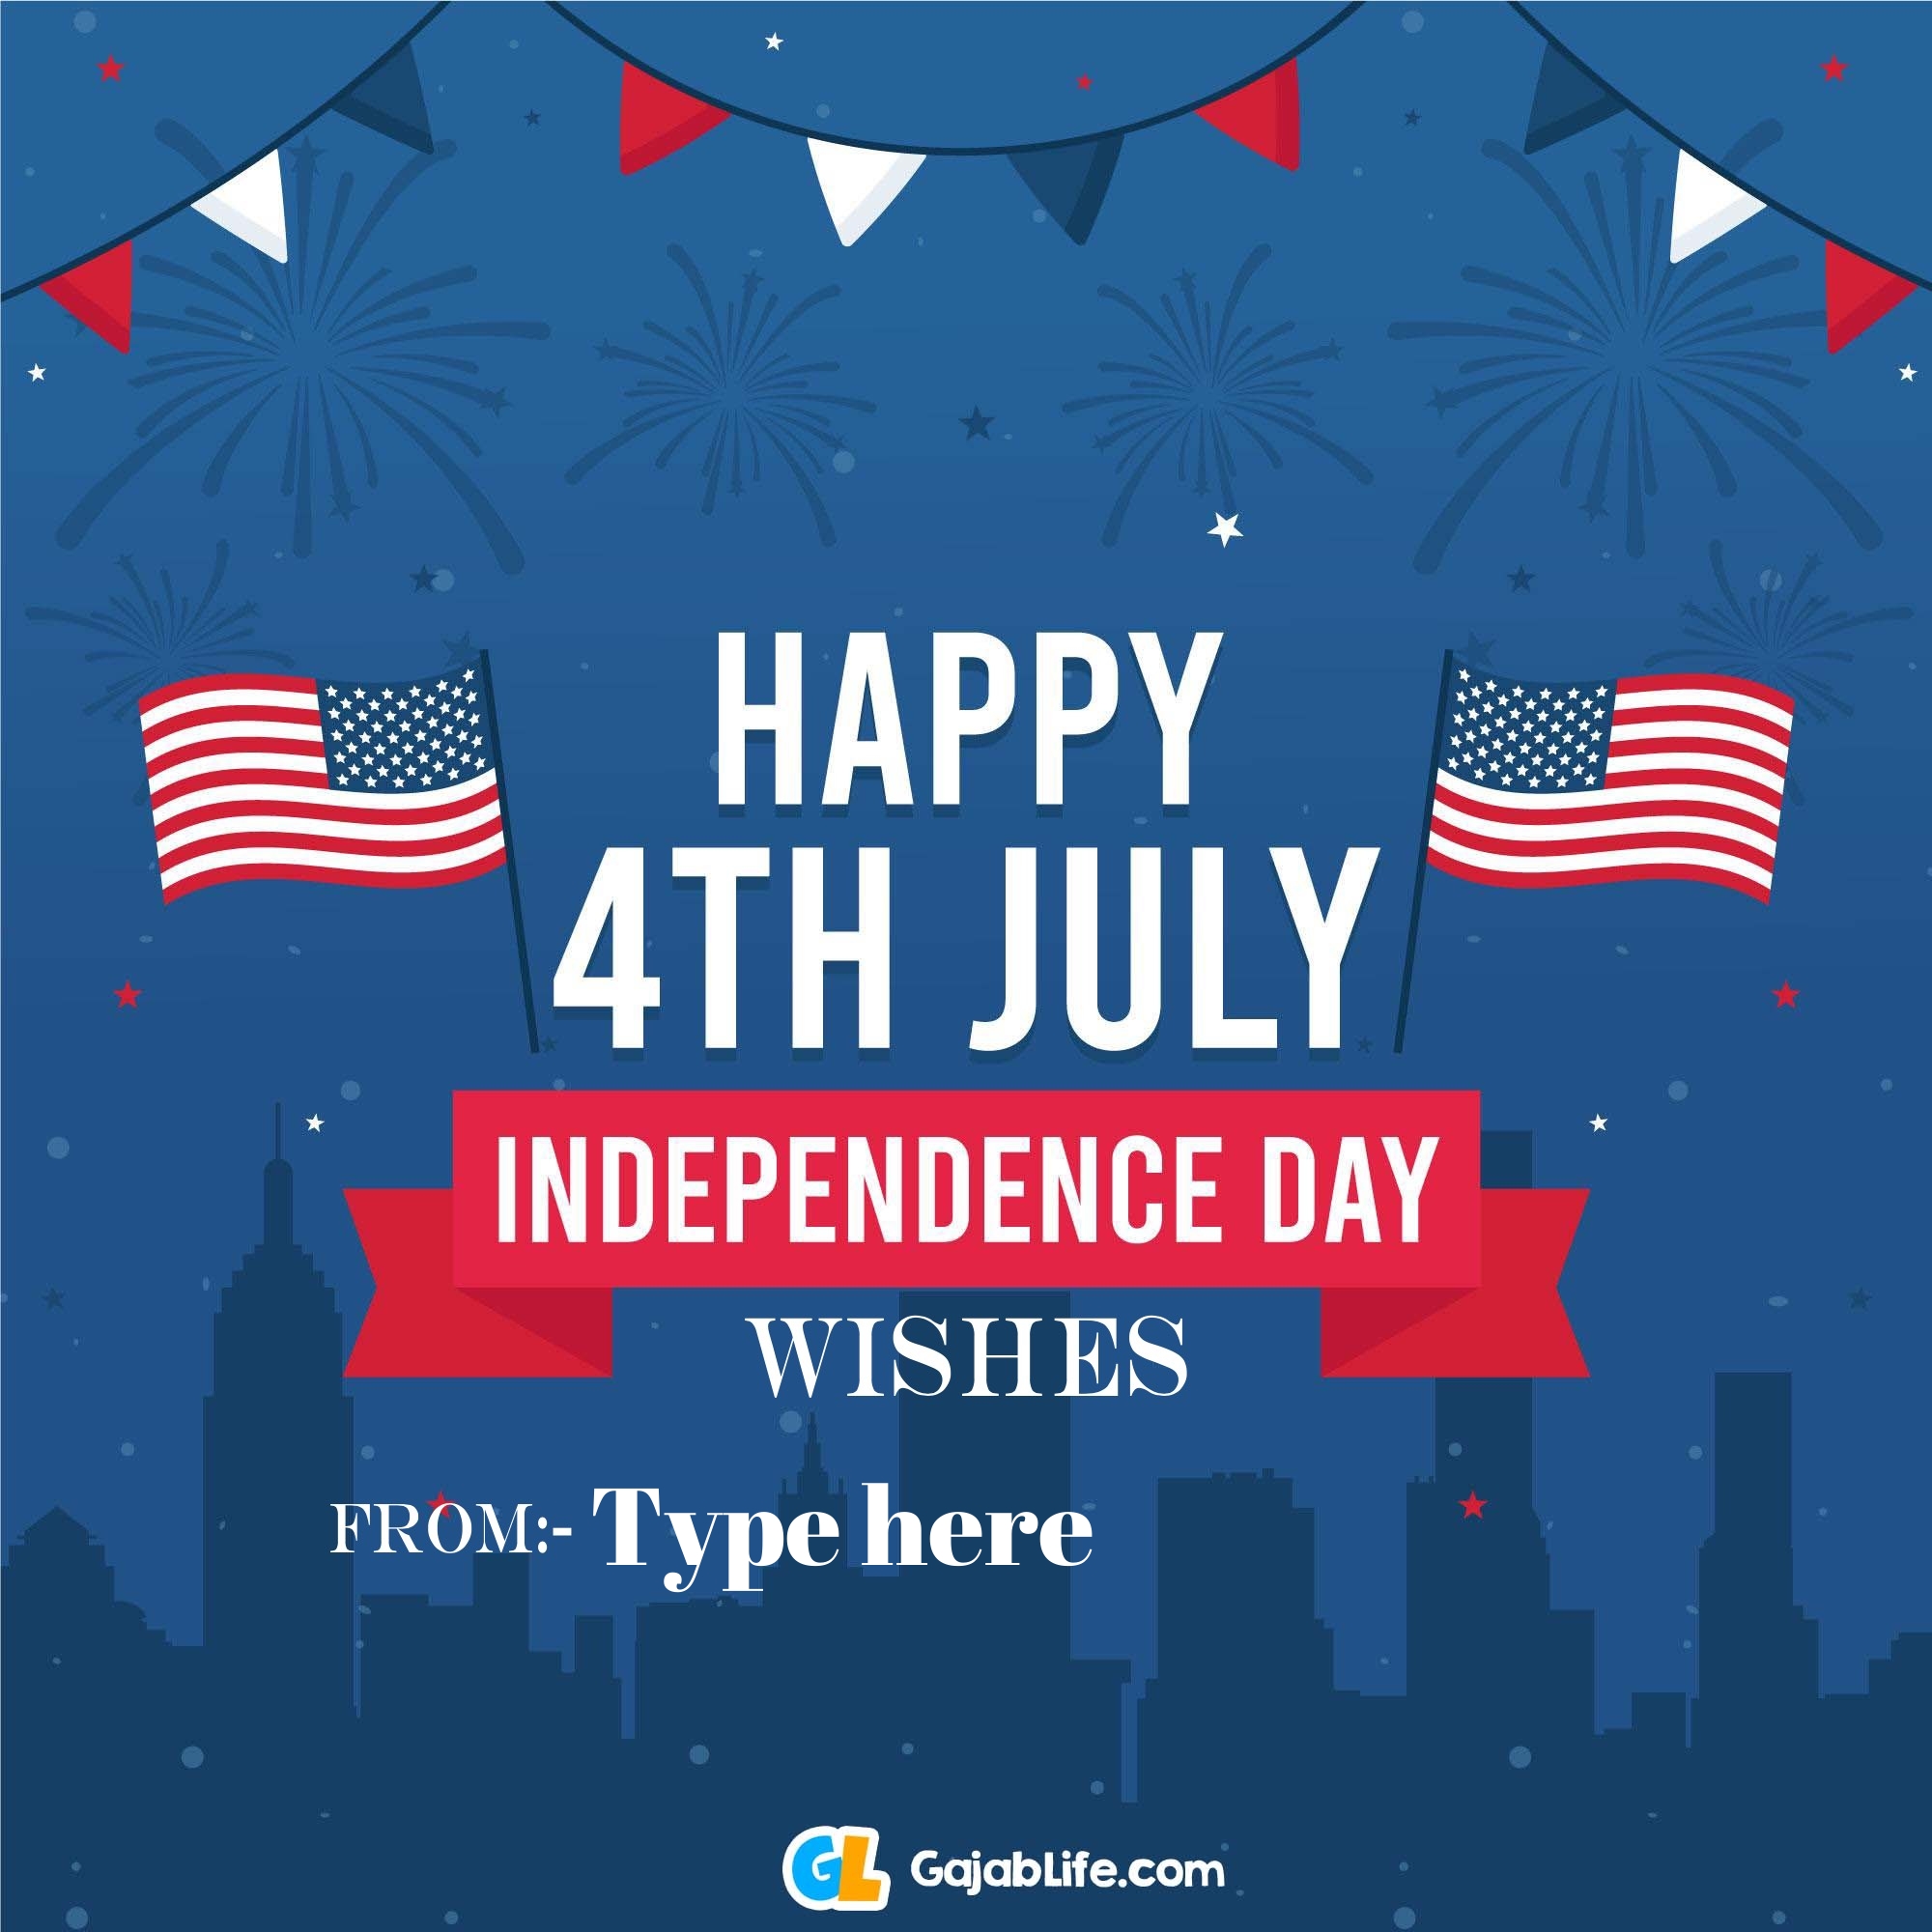  happy independence day united states of america images